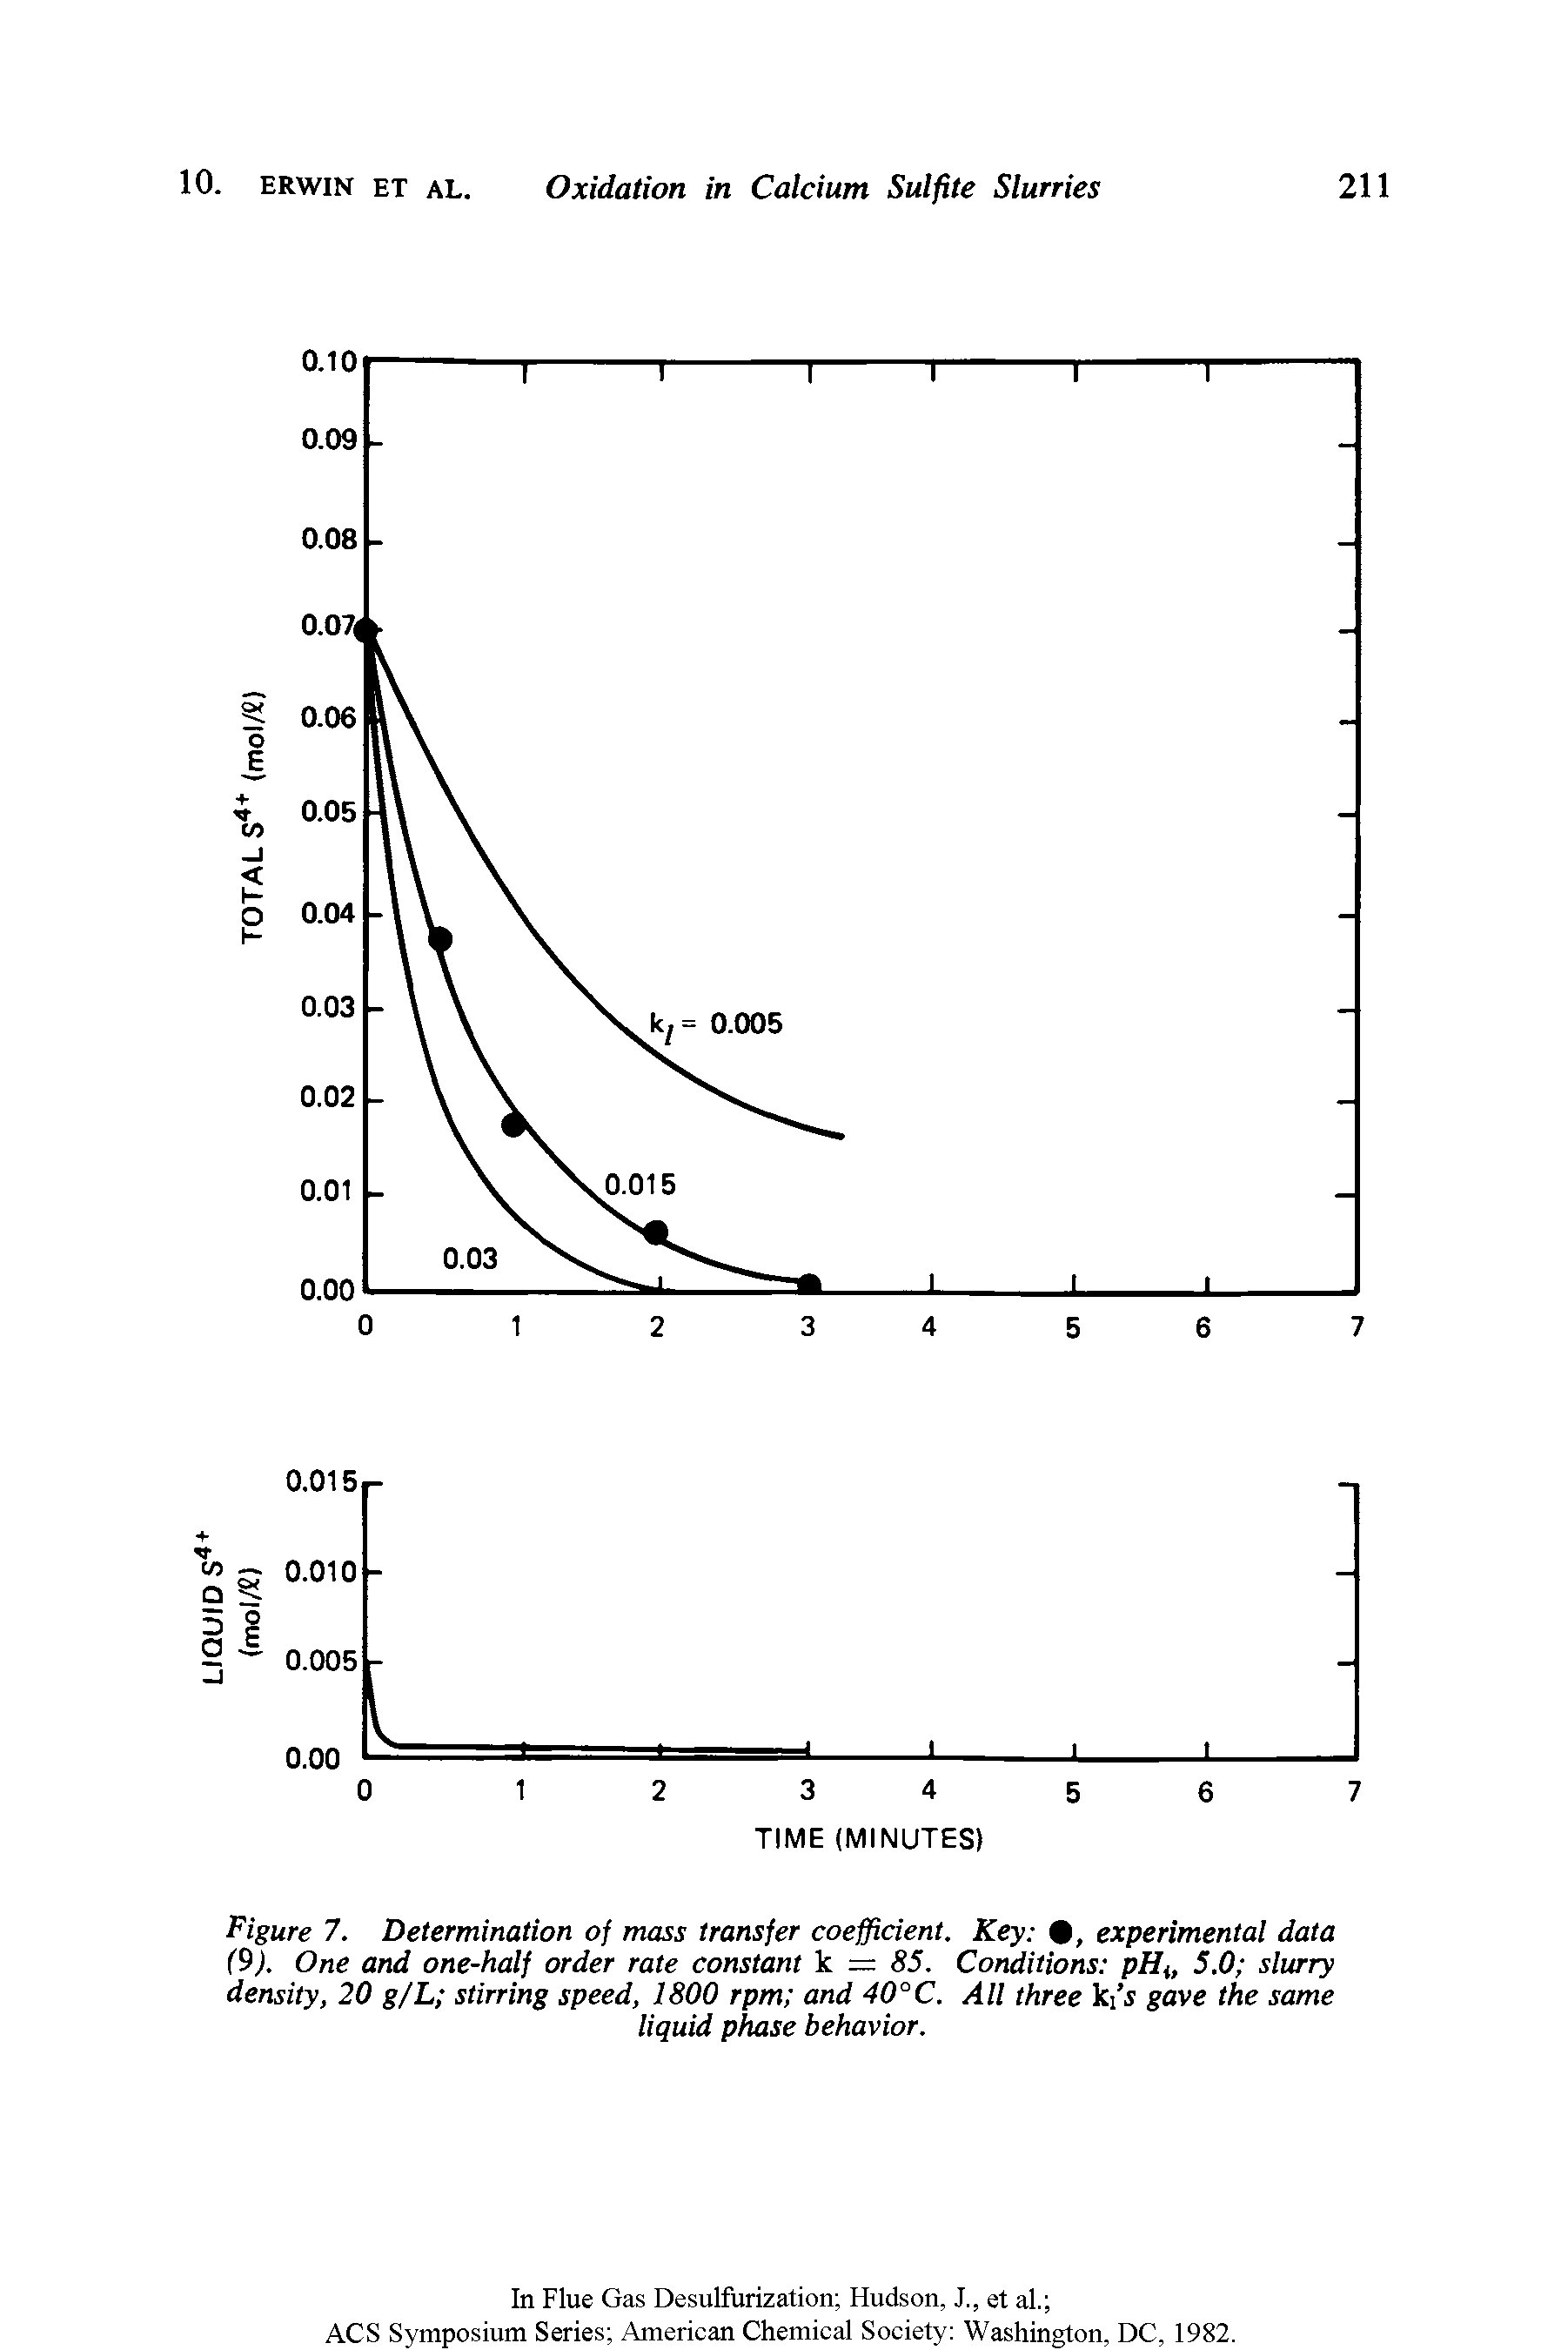 Figure 7. Determination of mass transfer coefficient. Key , experimental data (9). One and one-half order rate constant k = 85. Conditions pHit 5.0 slurry density, 20 g/L stirring speed, 1800 rpm and 40°C. All three ki s gave the same...